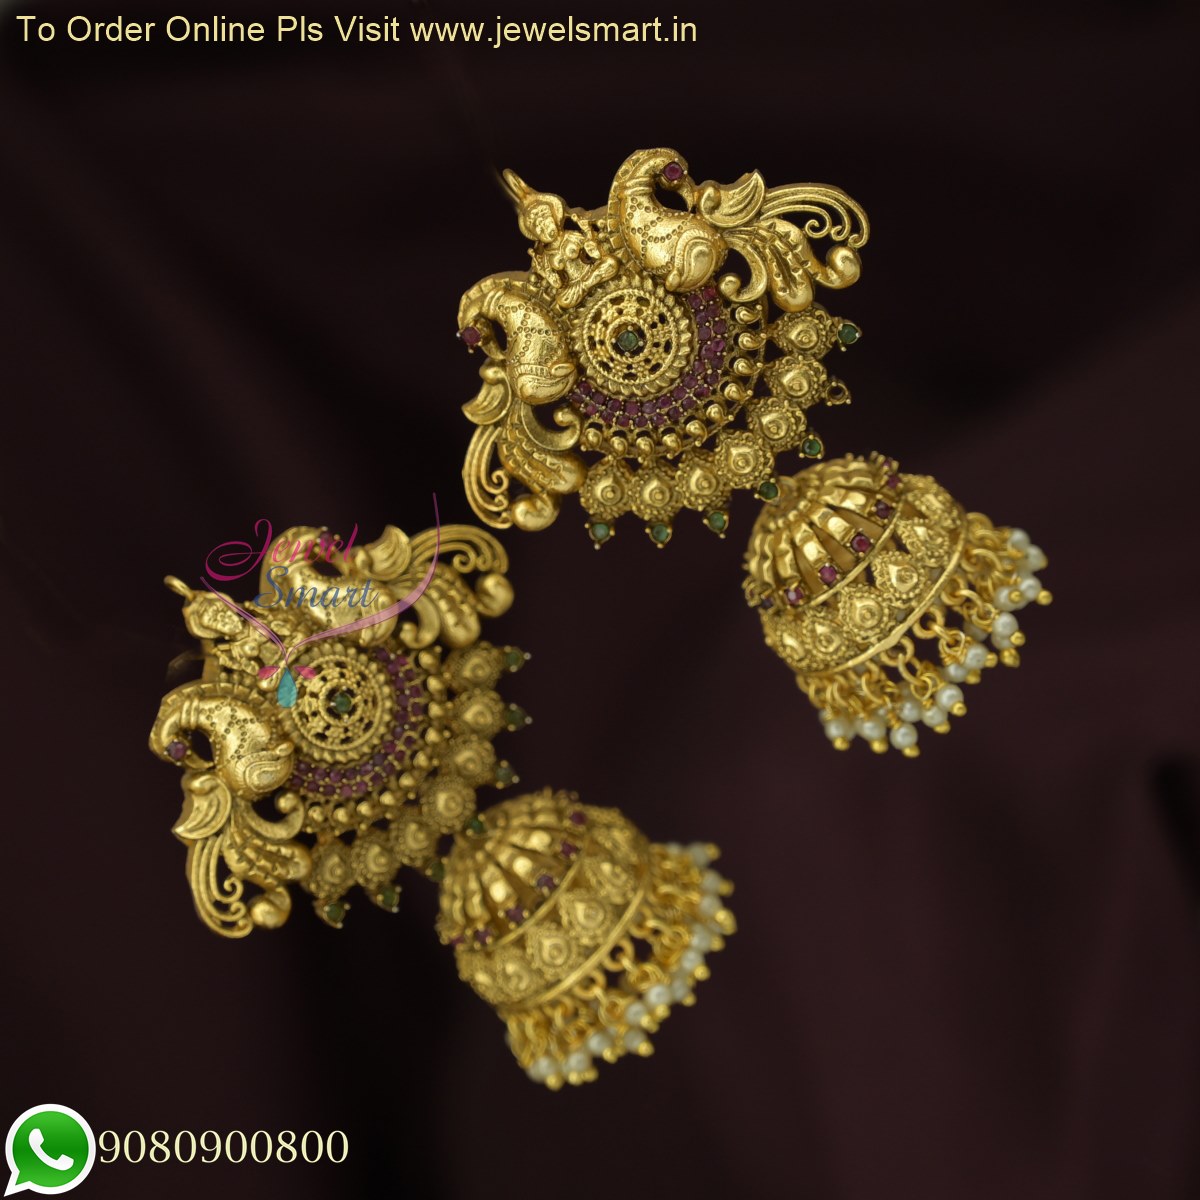 Antique South Indian Temple Earrings Design | Gold Matte Finish Earrings |  Latest Design - YouTube